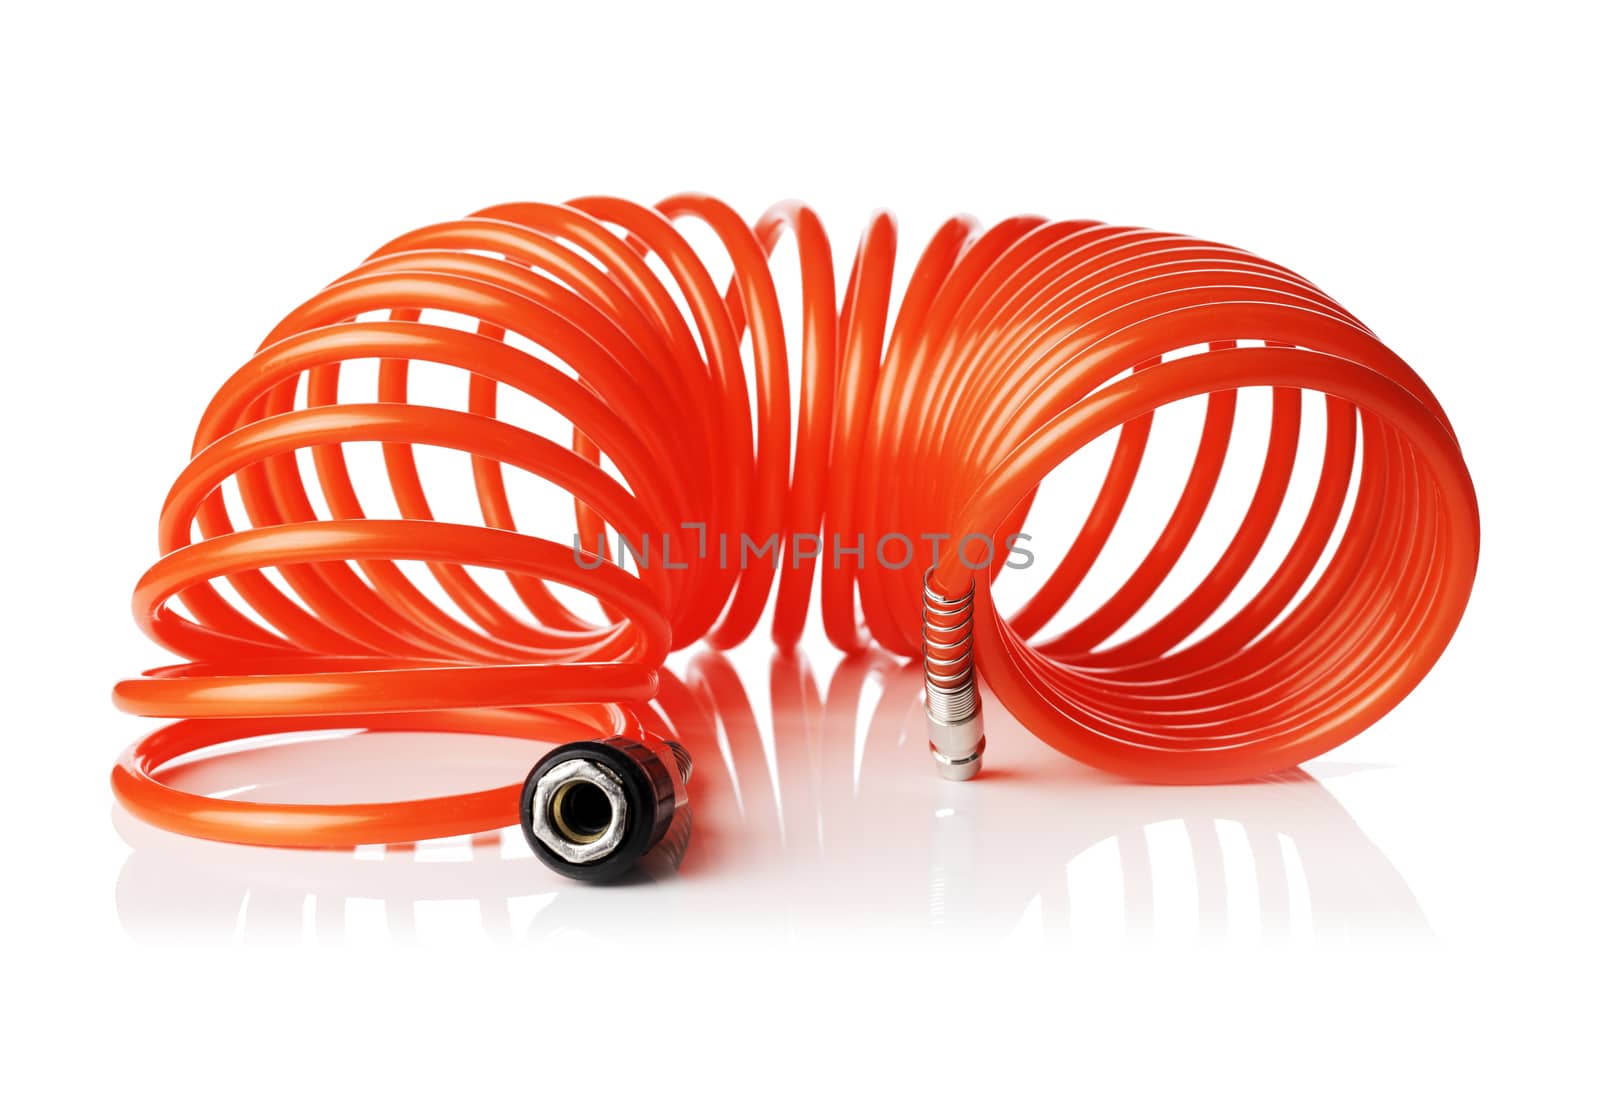 Spiral Air Hose by Stocksnapper